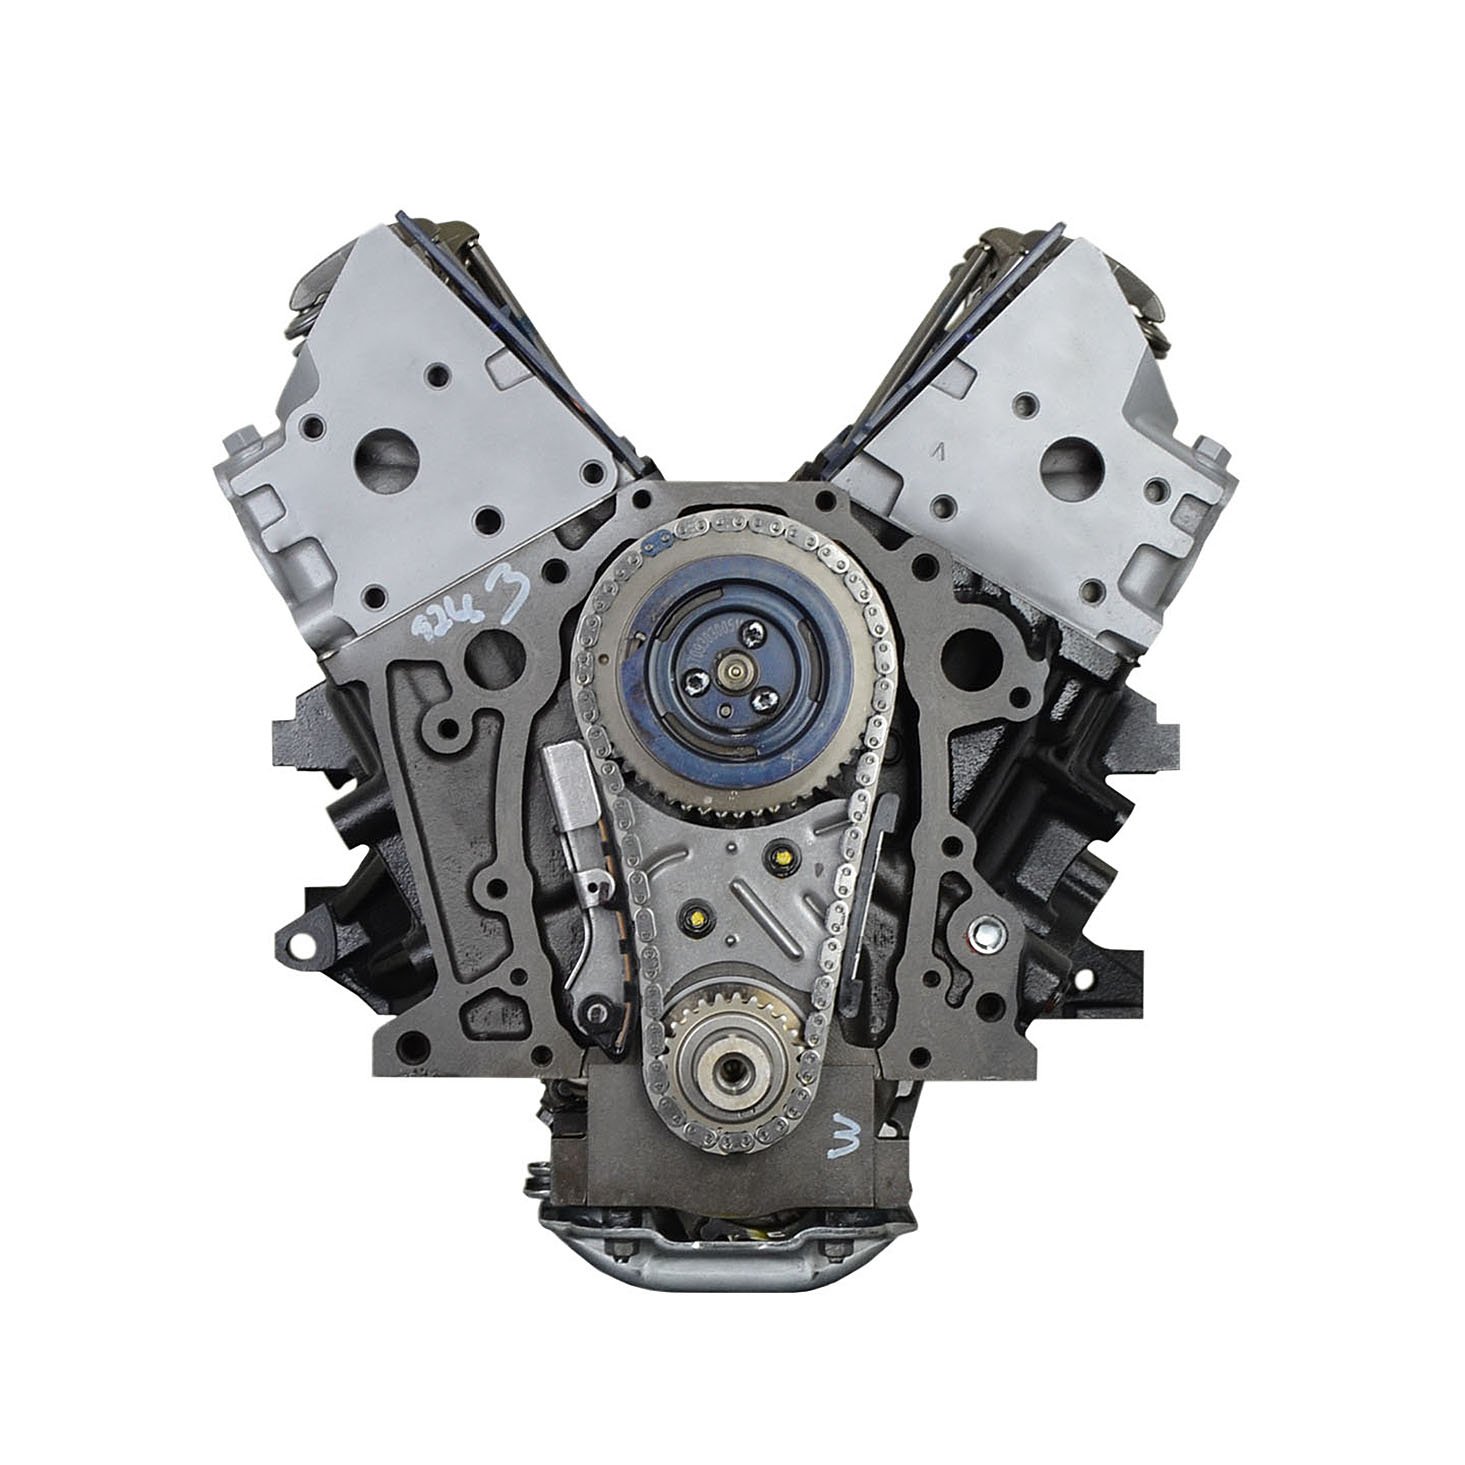 DCXF Remanufactured Crate Engine for 2009-2010 Chevy Impala with 3.9L V6